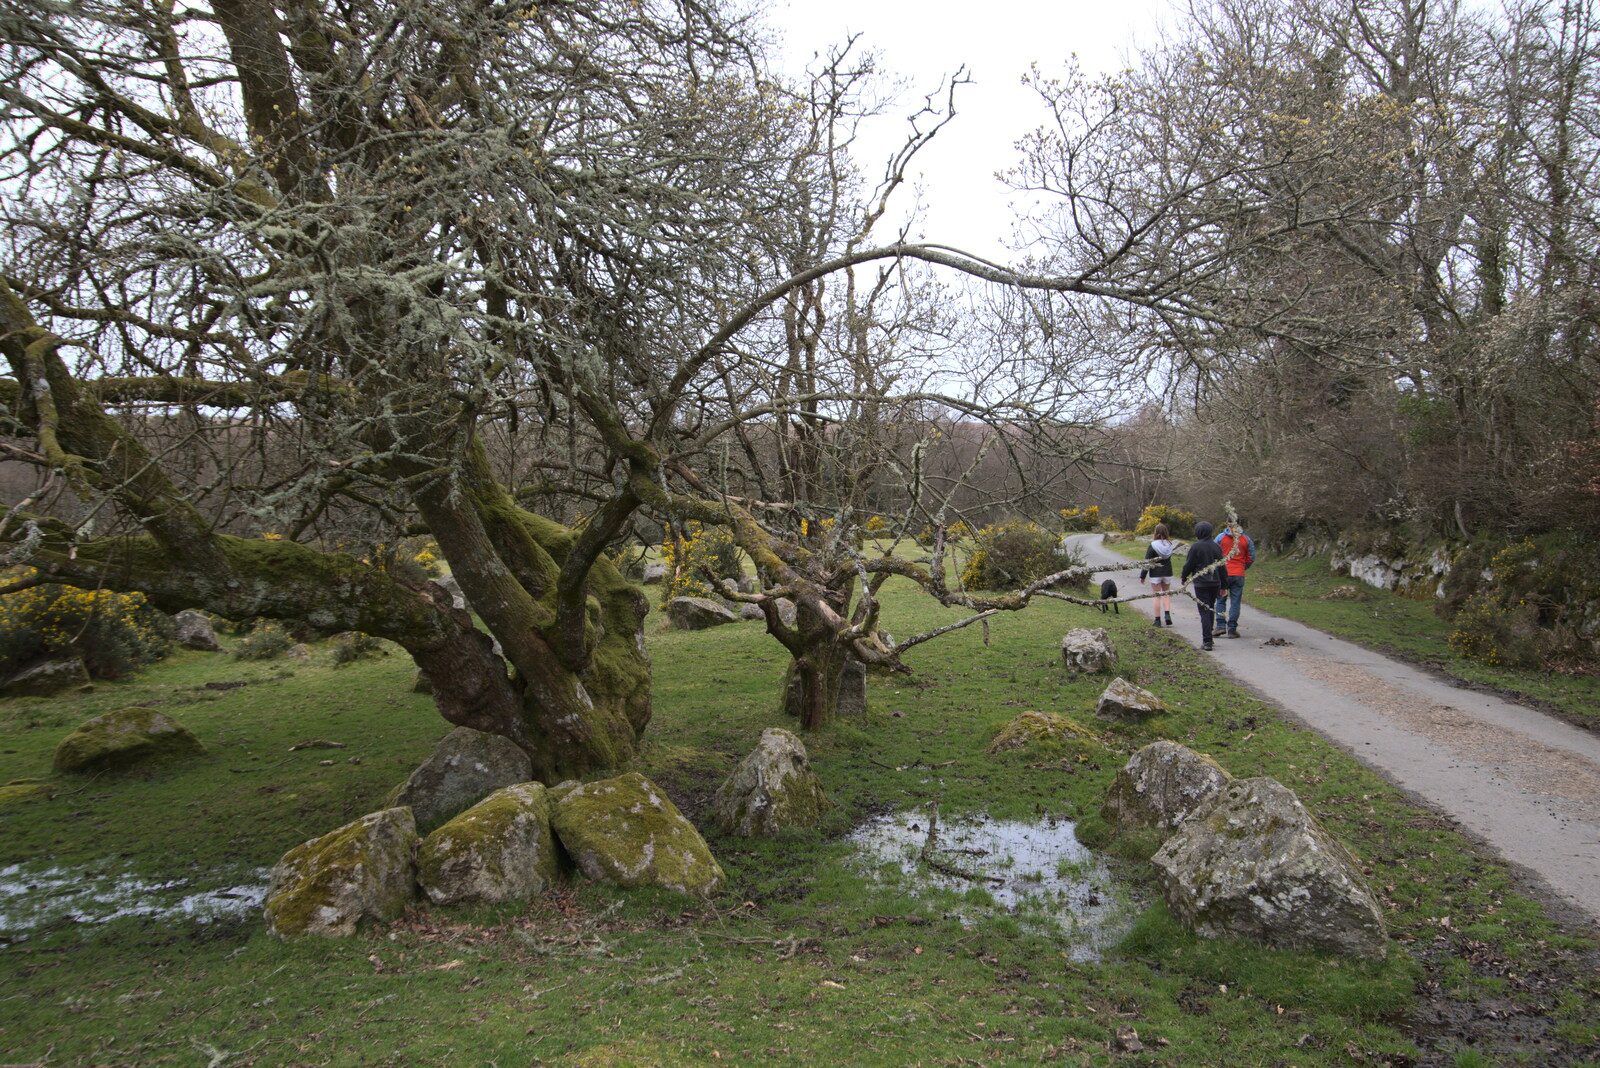 A gnarly tree near Little Ensworthy from Easter in South Zeal and Moretonhampstead, Devon - 9th April